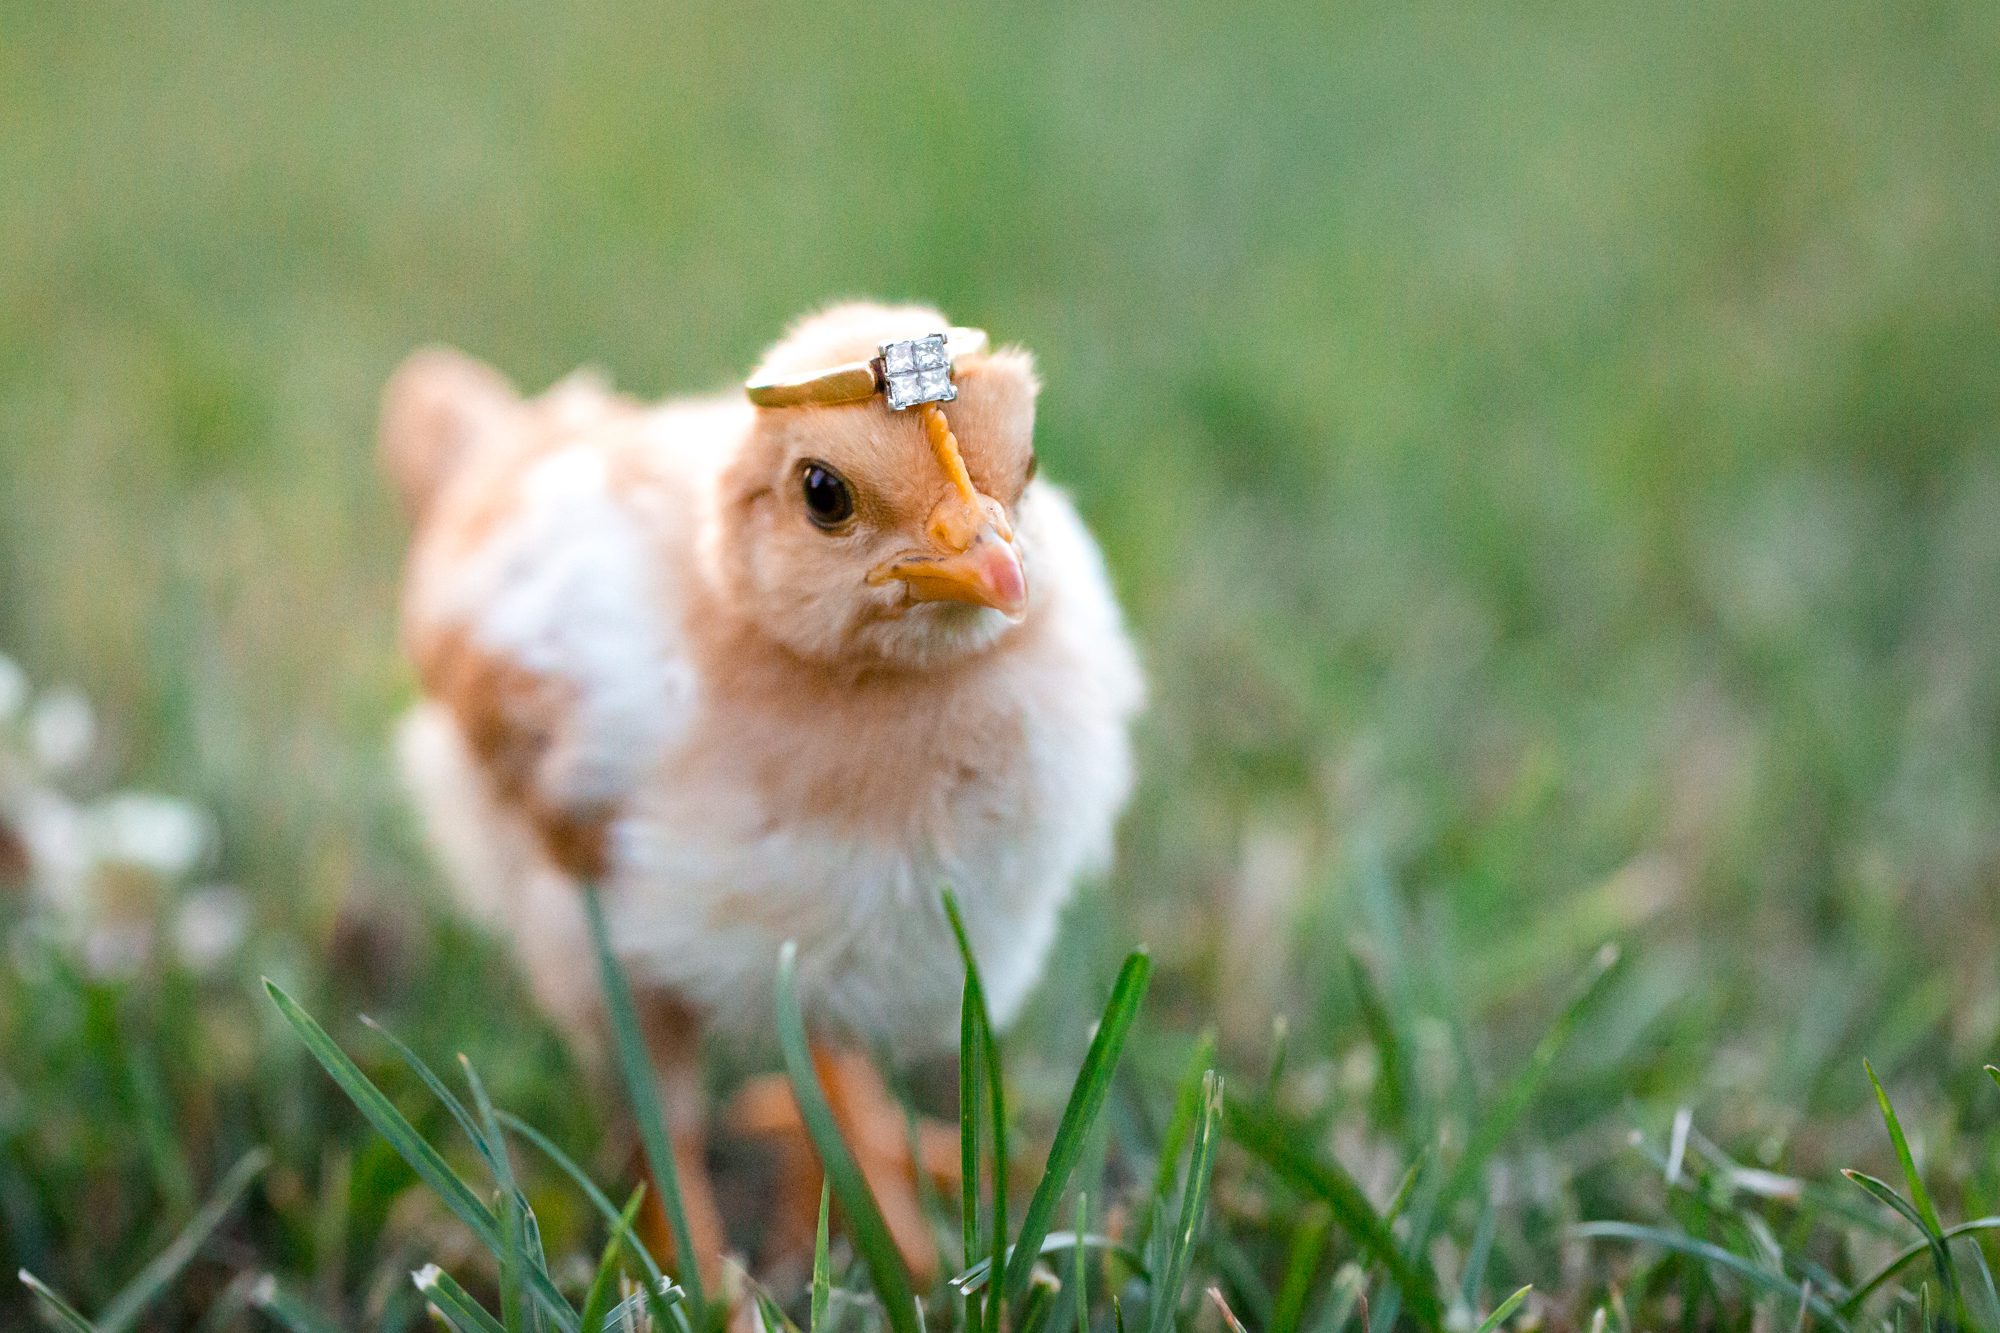 engagement ring with baby chick